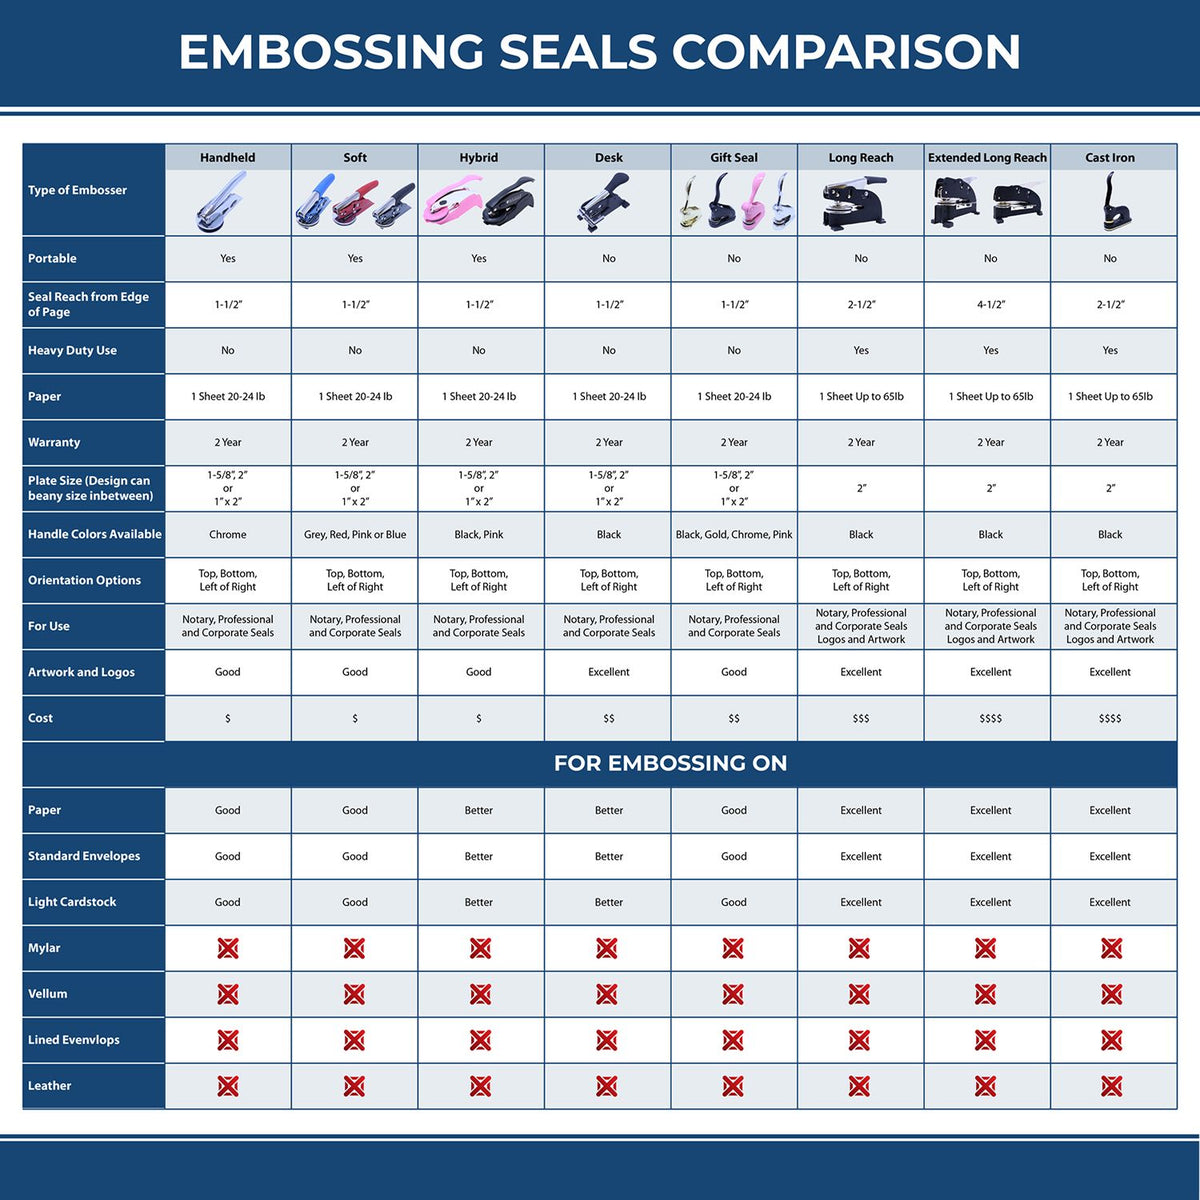 A comparison chart for the different types of mount models available for the Soft Pocket Delaware Landscape Architect Embosser.